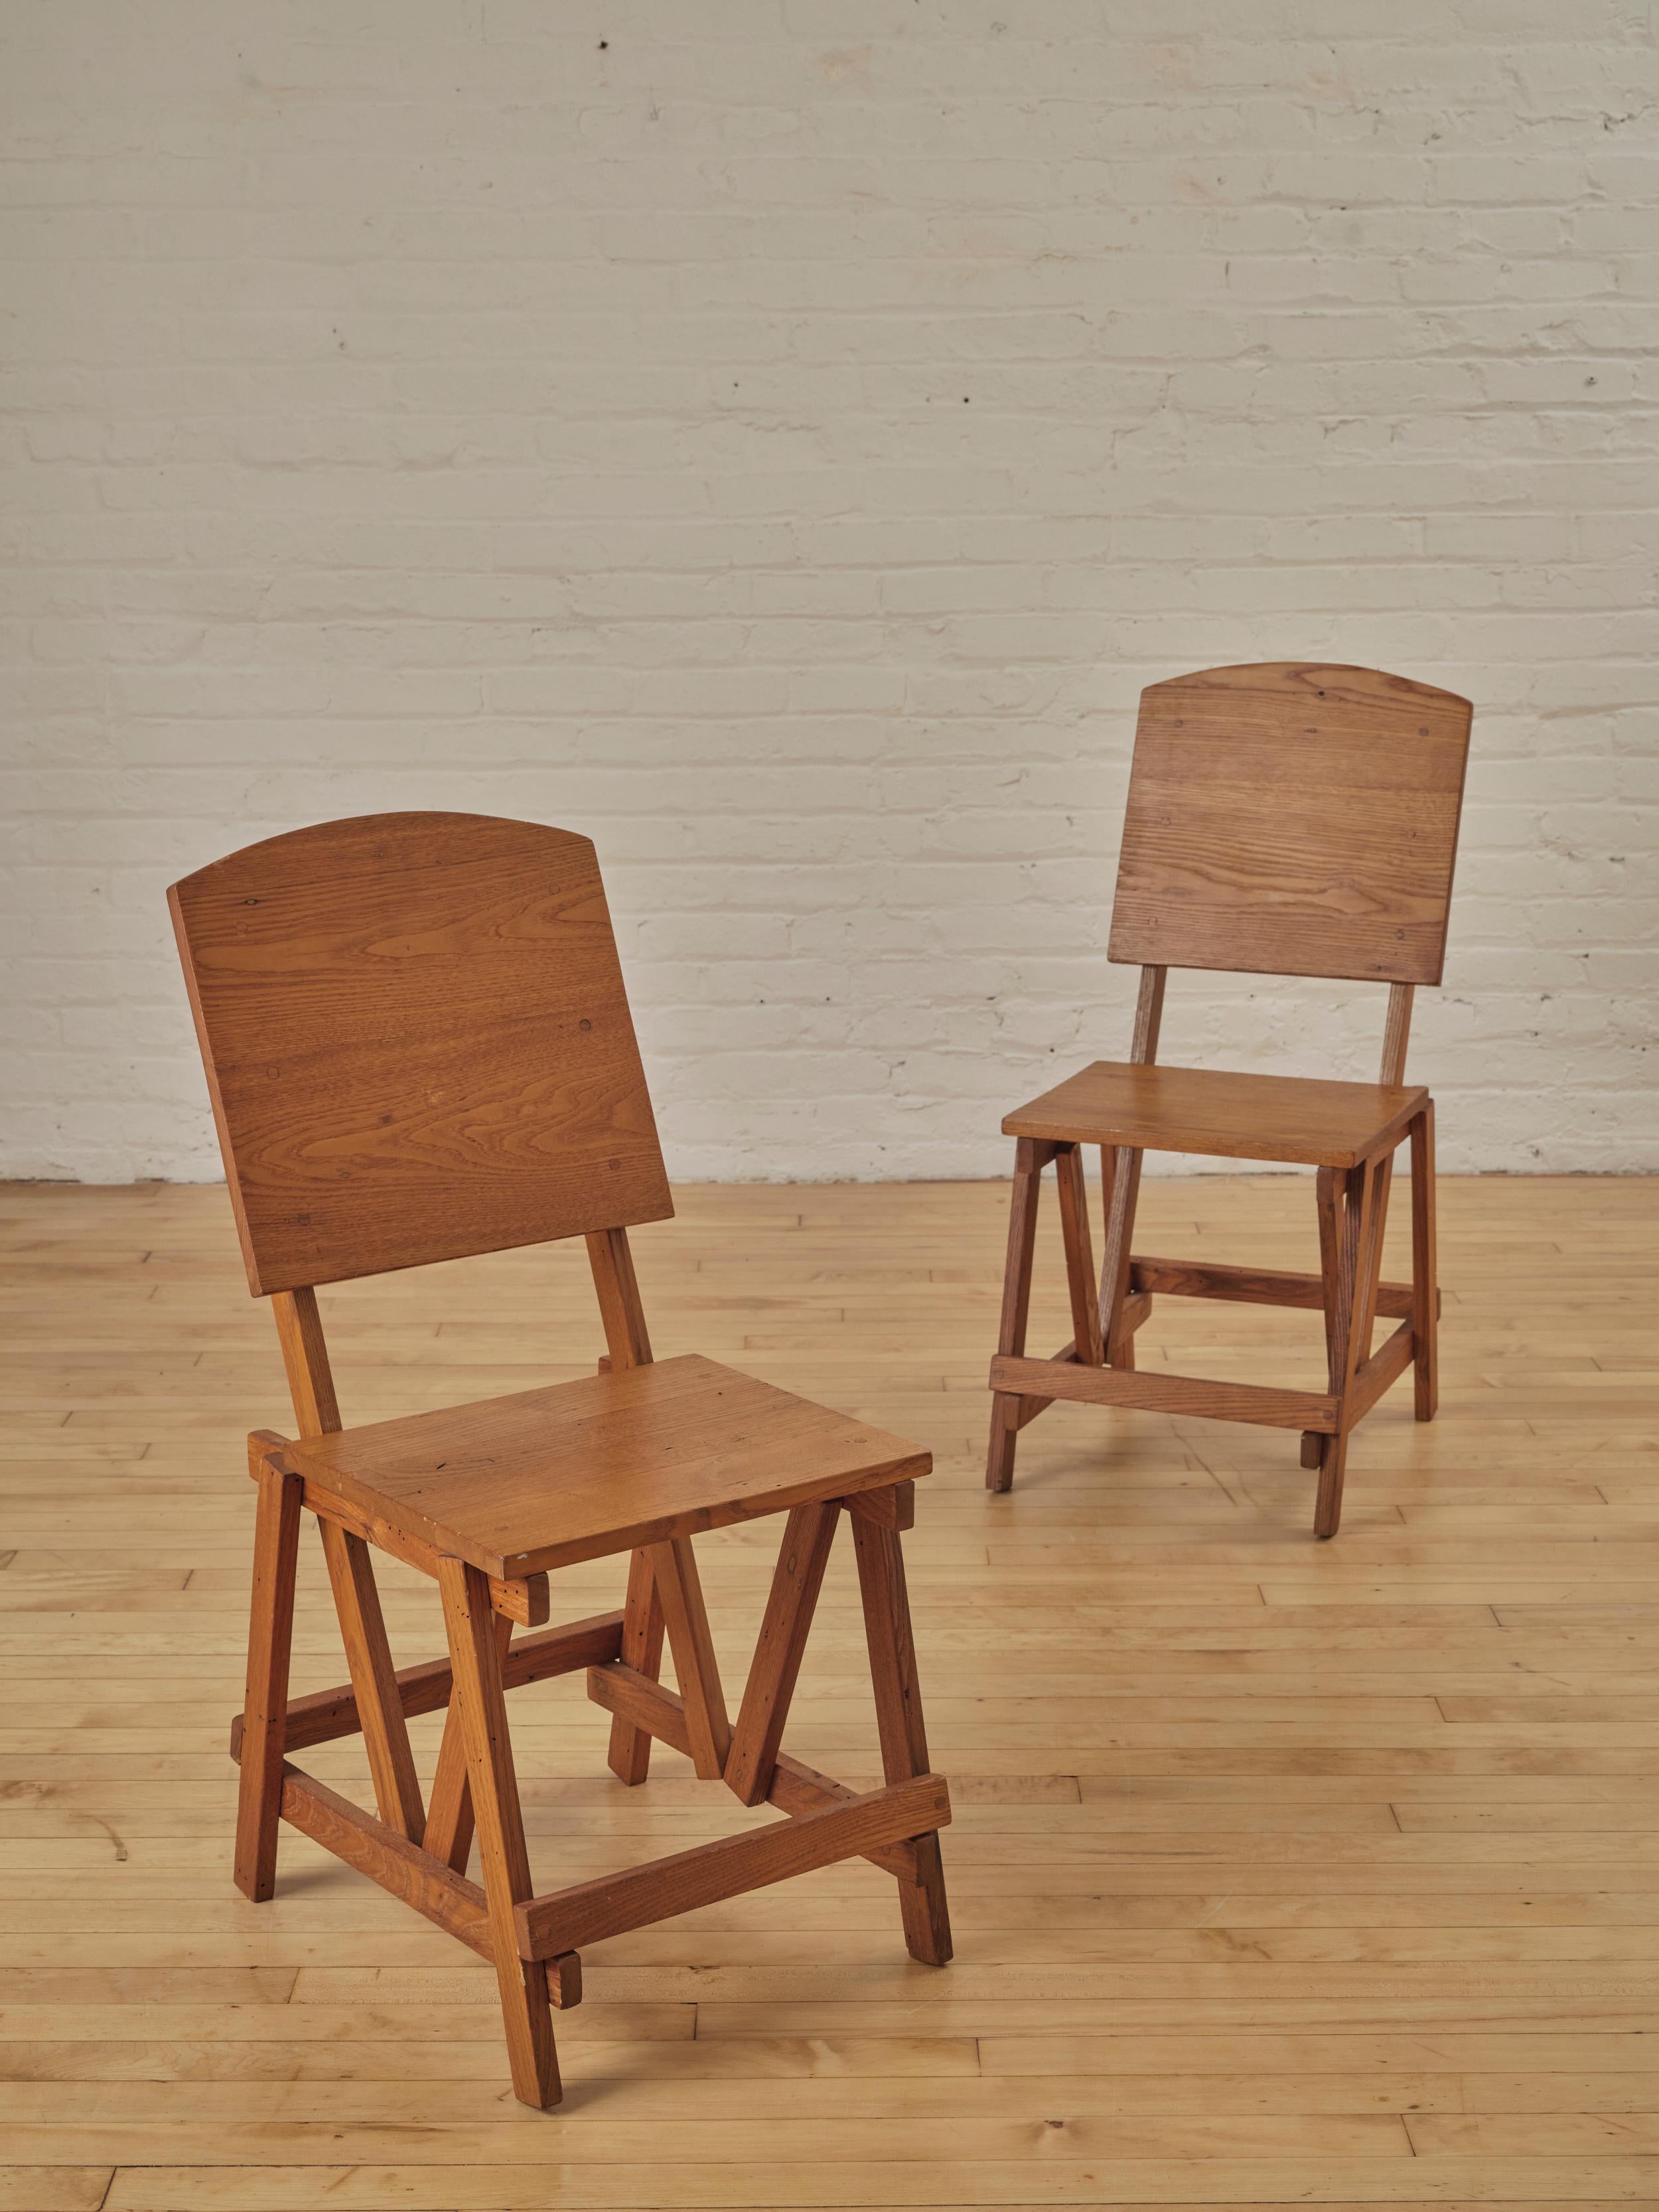 A pair of architectural constructivist oak accent chairs. These well constructed solid oak chairs feature peg joinery and architectural angels.

